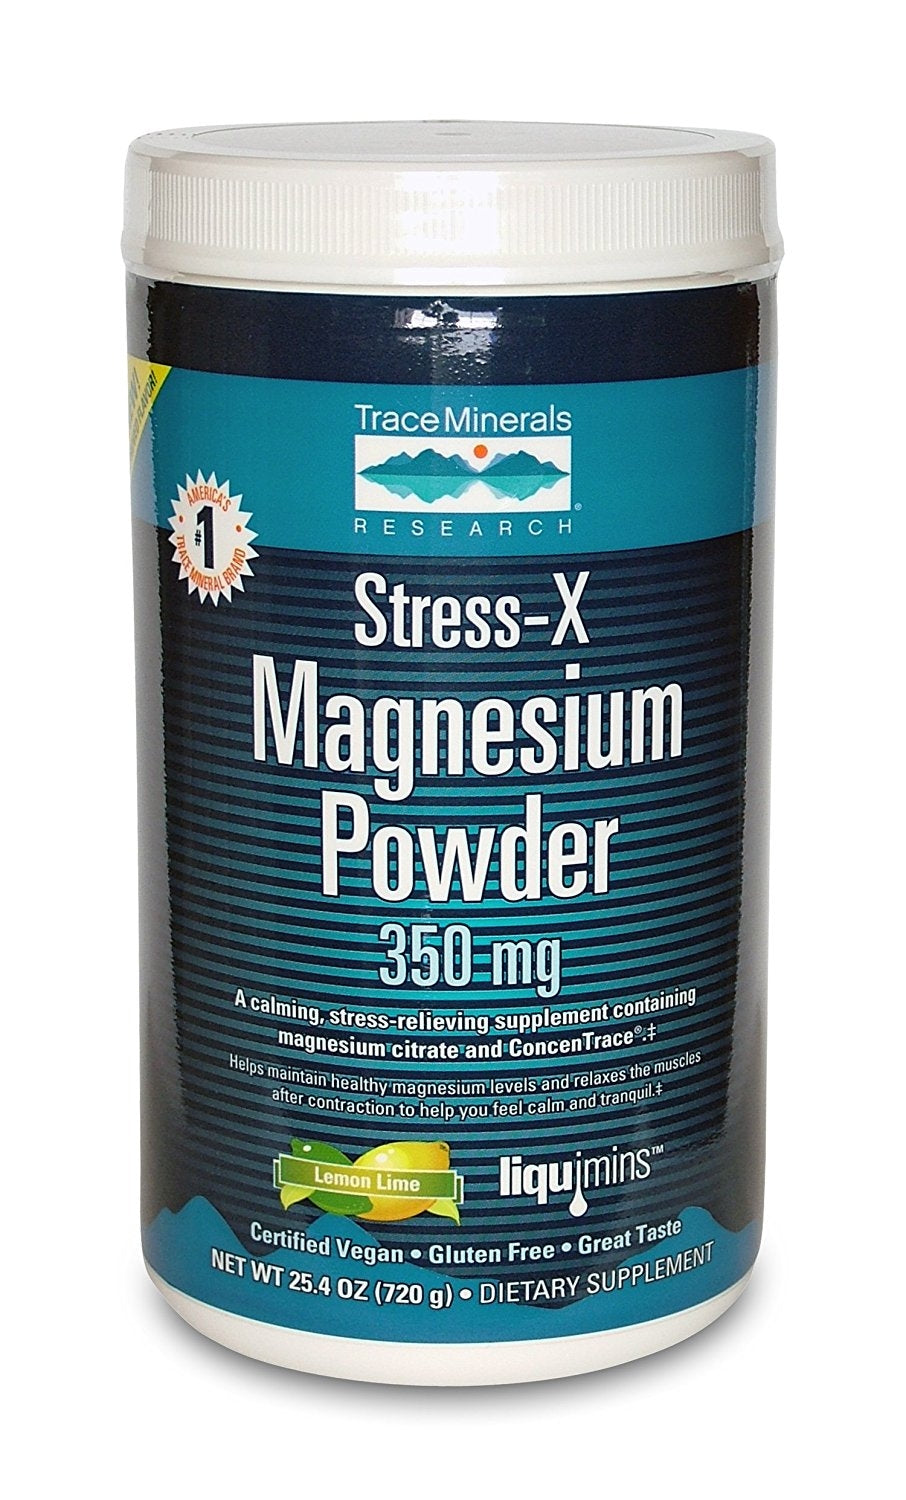 Trace Minerals Research, Stress-X Magnesium Powder, Lemon Lime 350mg, 17.6-Ounce